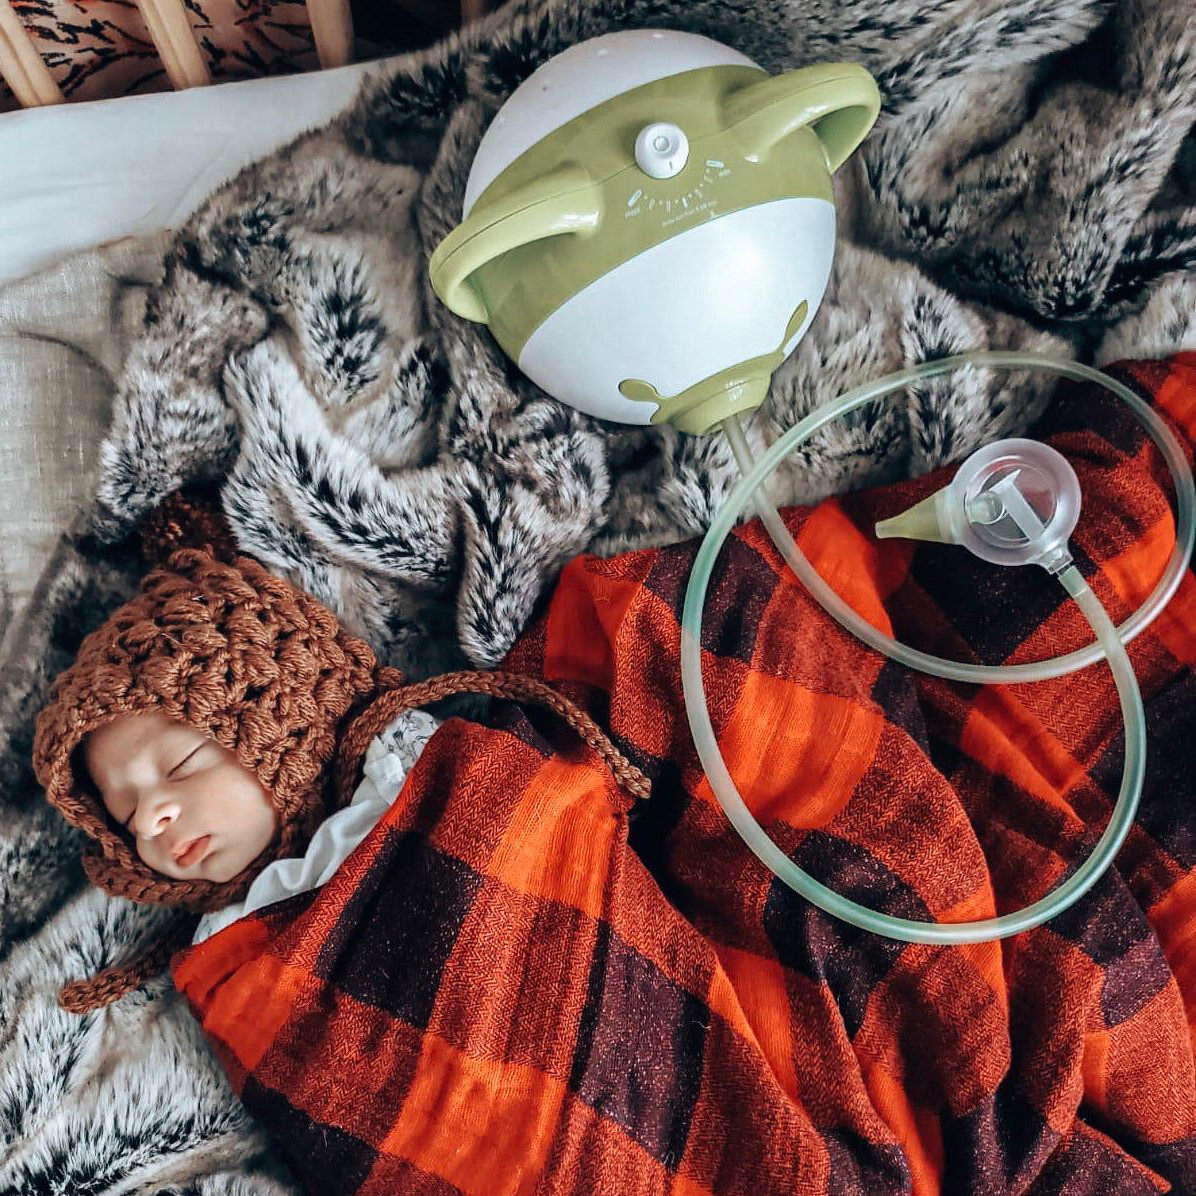 A newborn sleeping in a bed, next to a Nosiboo Pro electric nasal aspirator